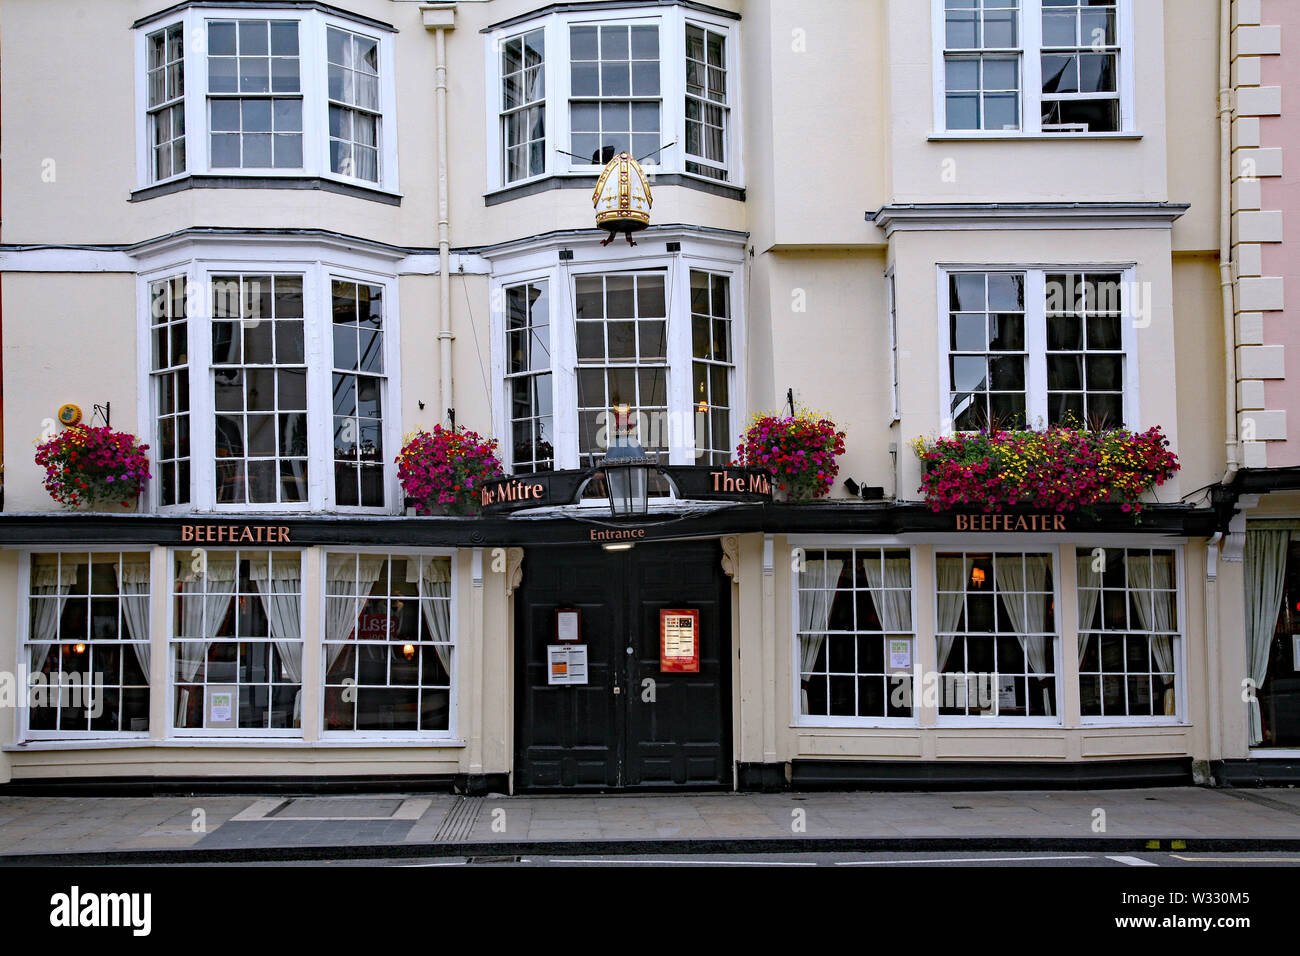 OXFORD, ENGLAND - JULY 2009:  The Mitre Inn is an Oxford landmark, dating from around 1630, and replacing an earlier inn from the 1300s. Stock Photo